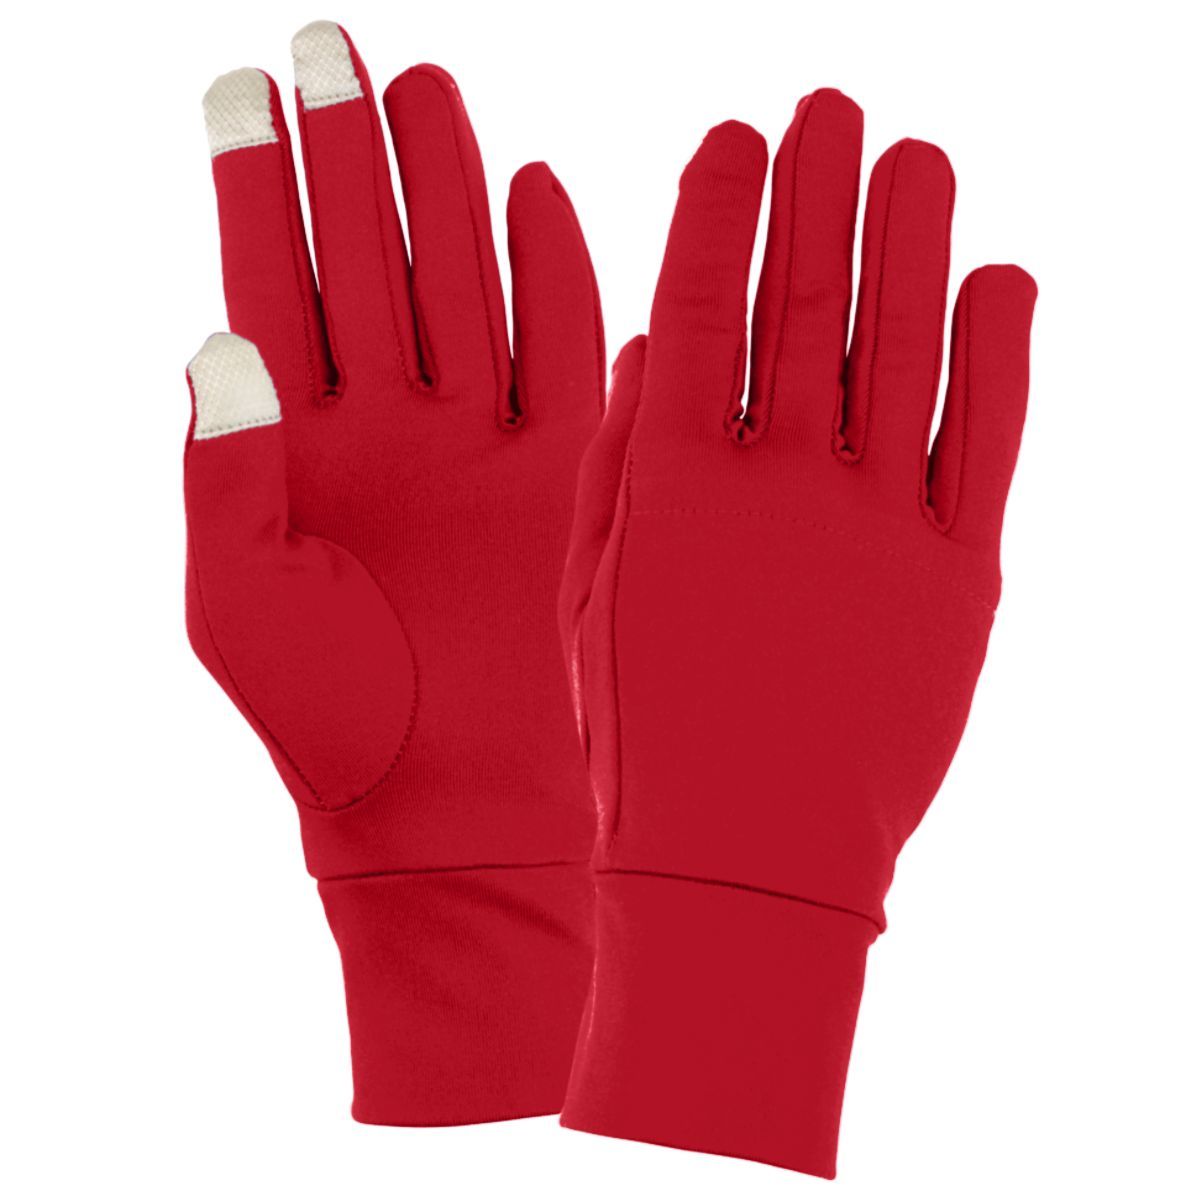 Augusta Sportswear Tech Gloves in Red  -Part of the Accessories, Augusta-Products, Accessories-Gloves product lines at KanaleyCreations.com